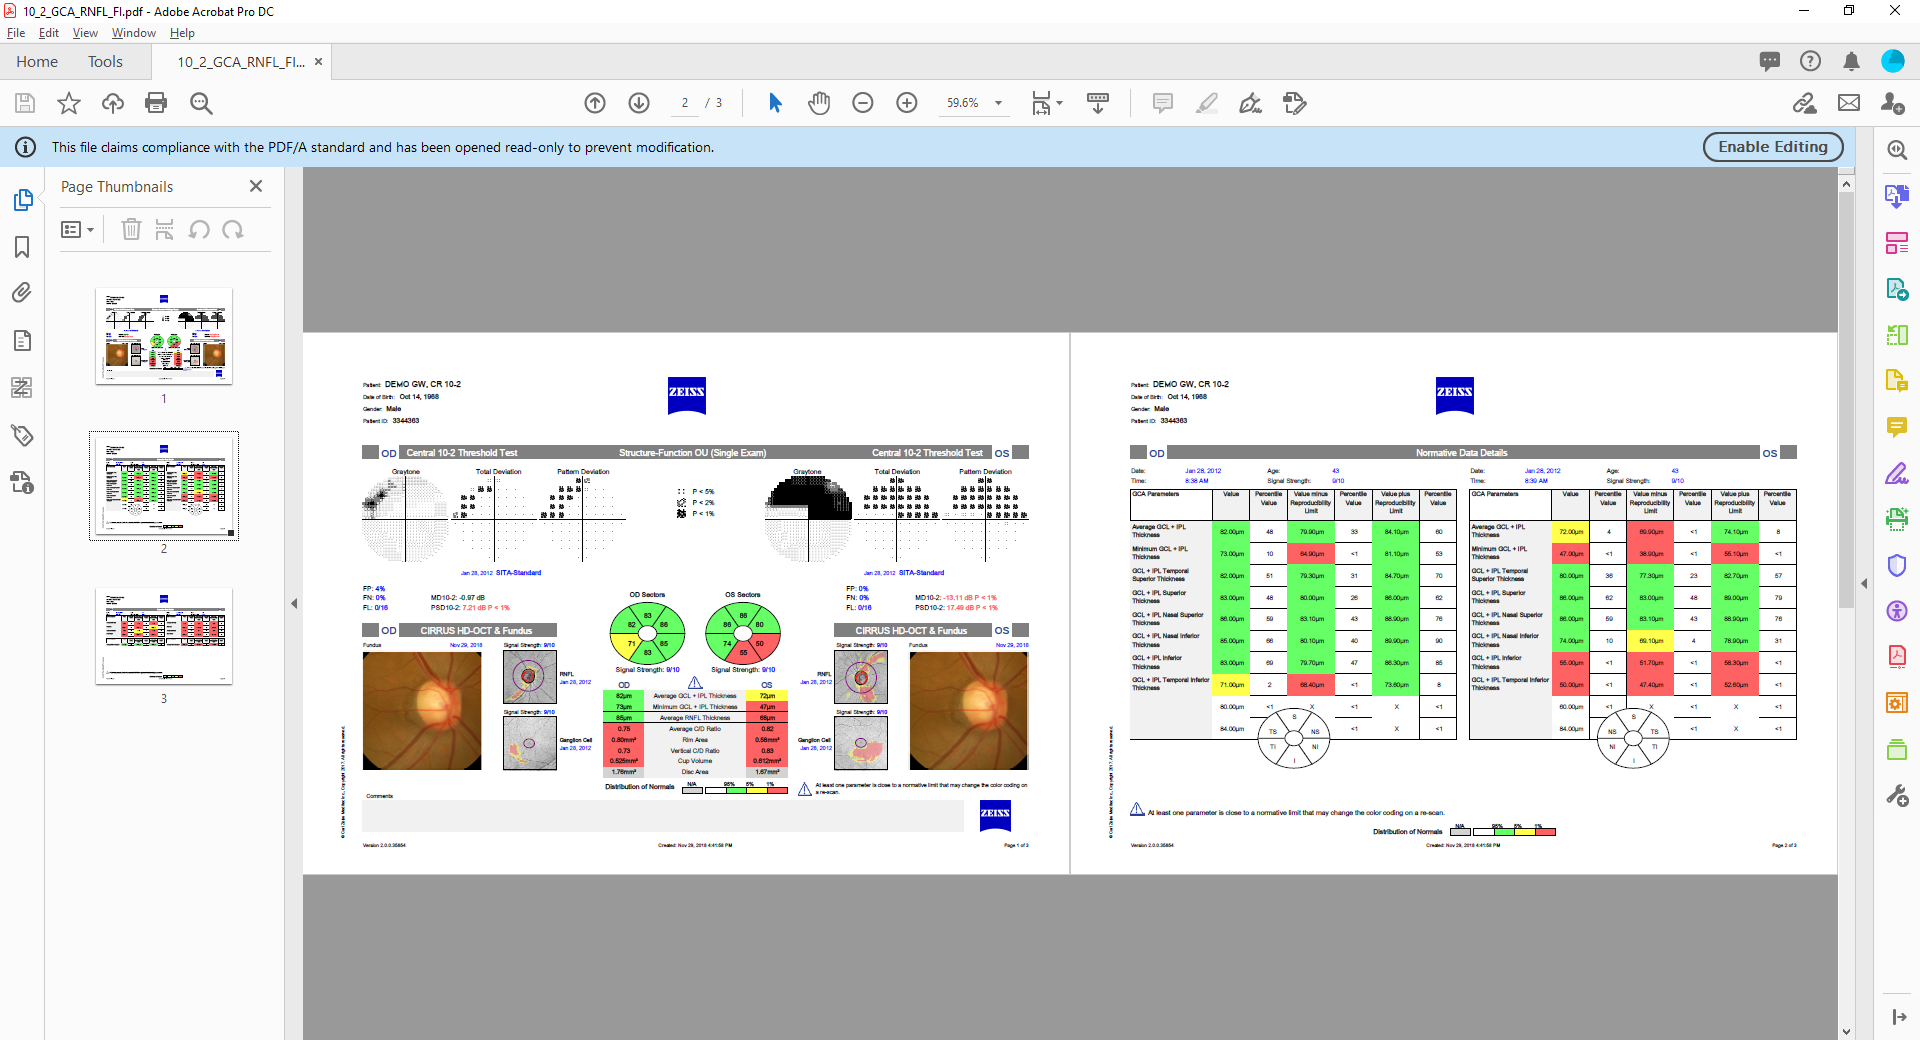 A combined PDF report produced by the FORUM software. As you can see, it is compliant with the PDF/A standard.